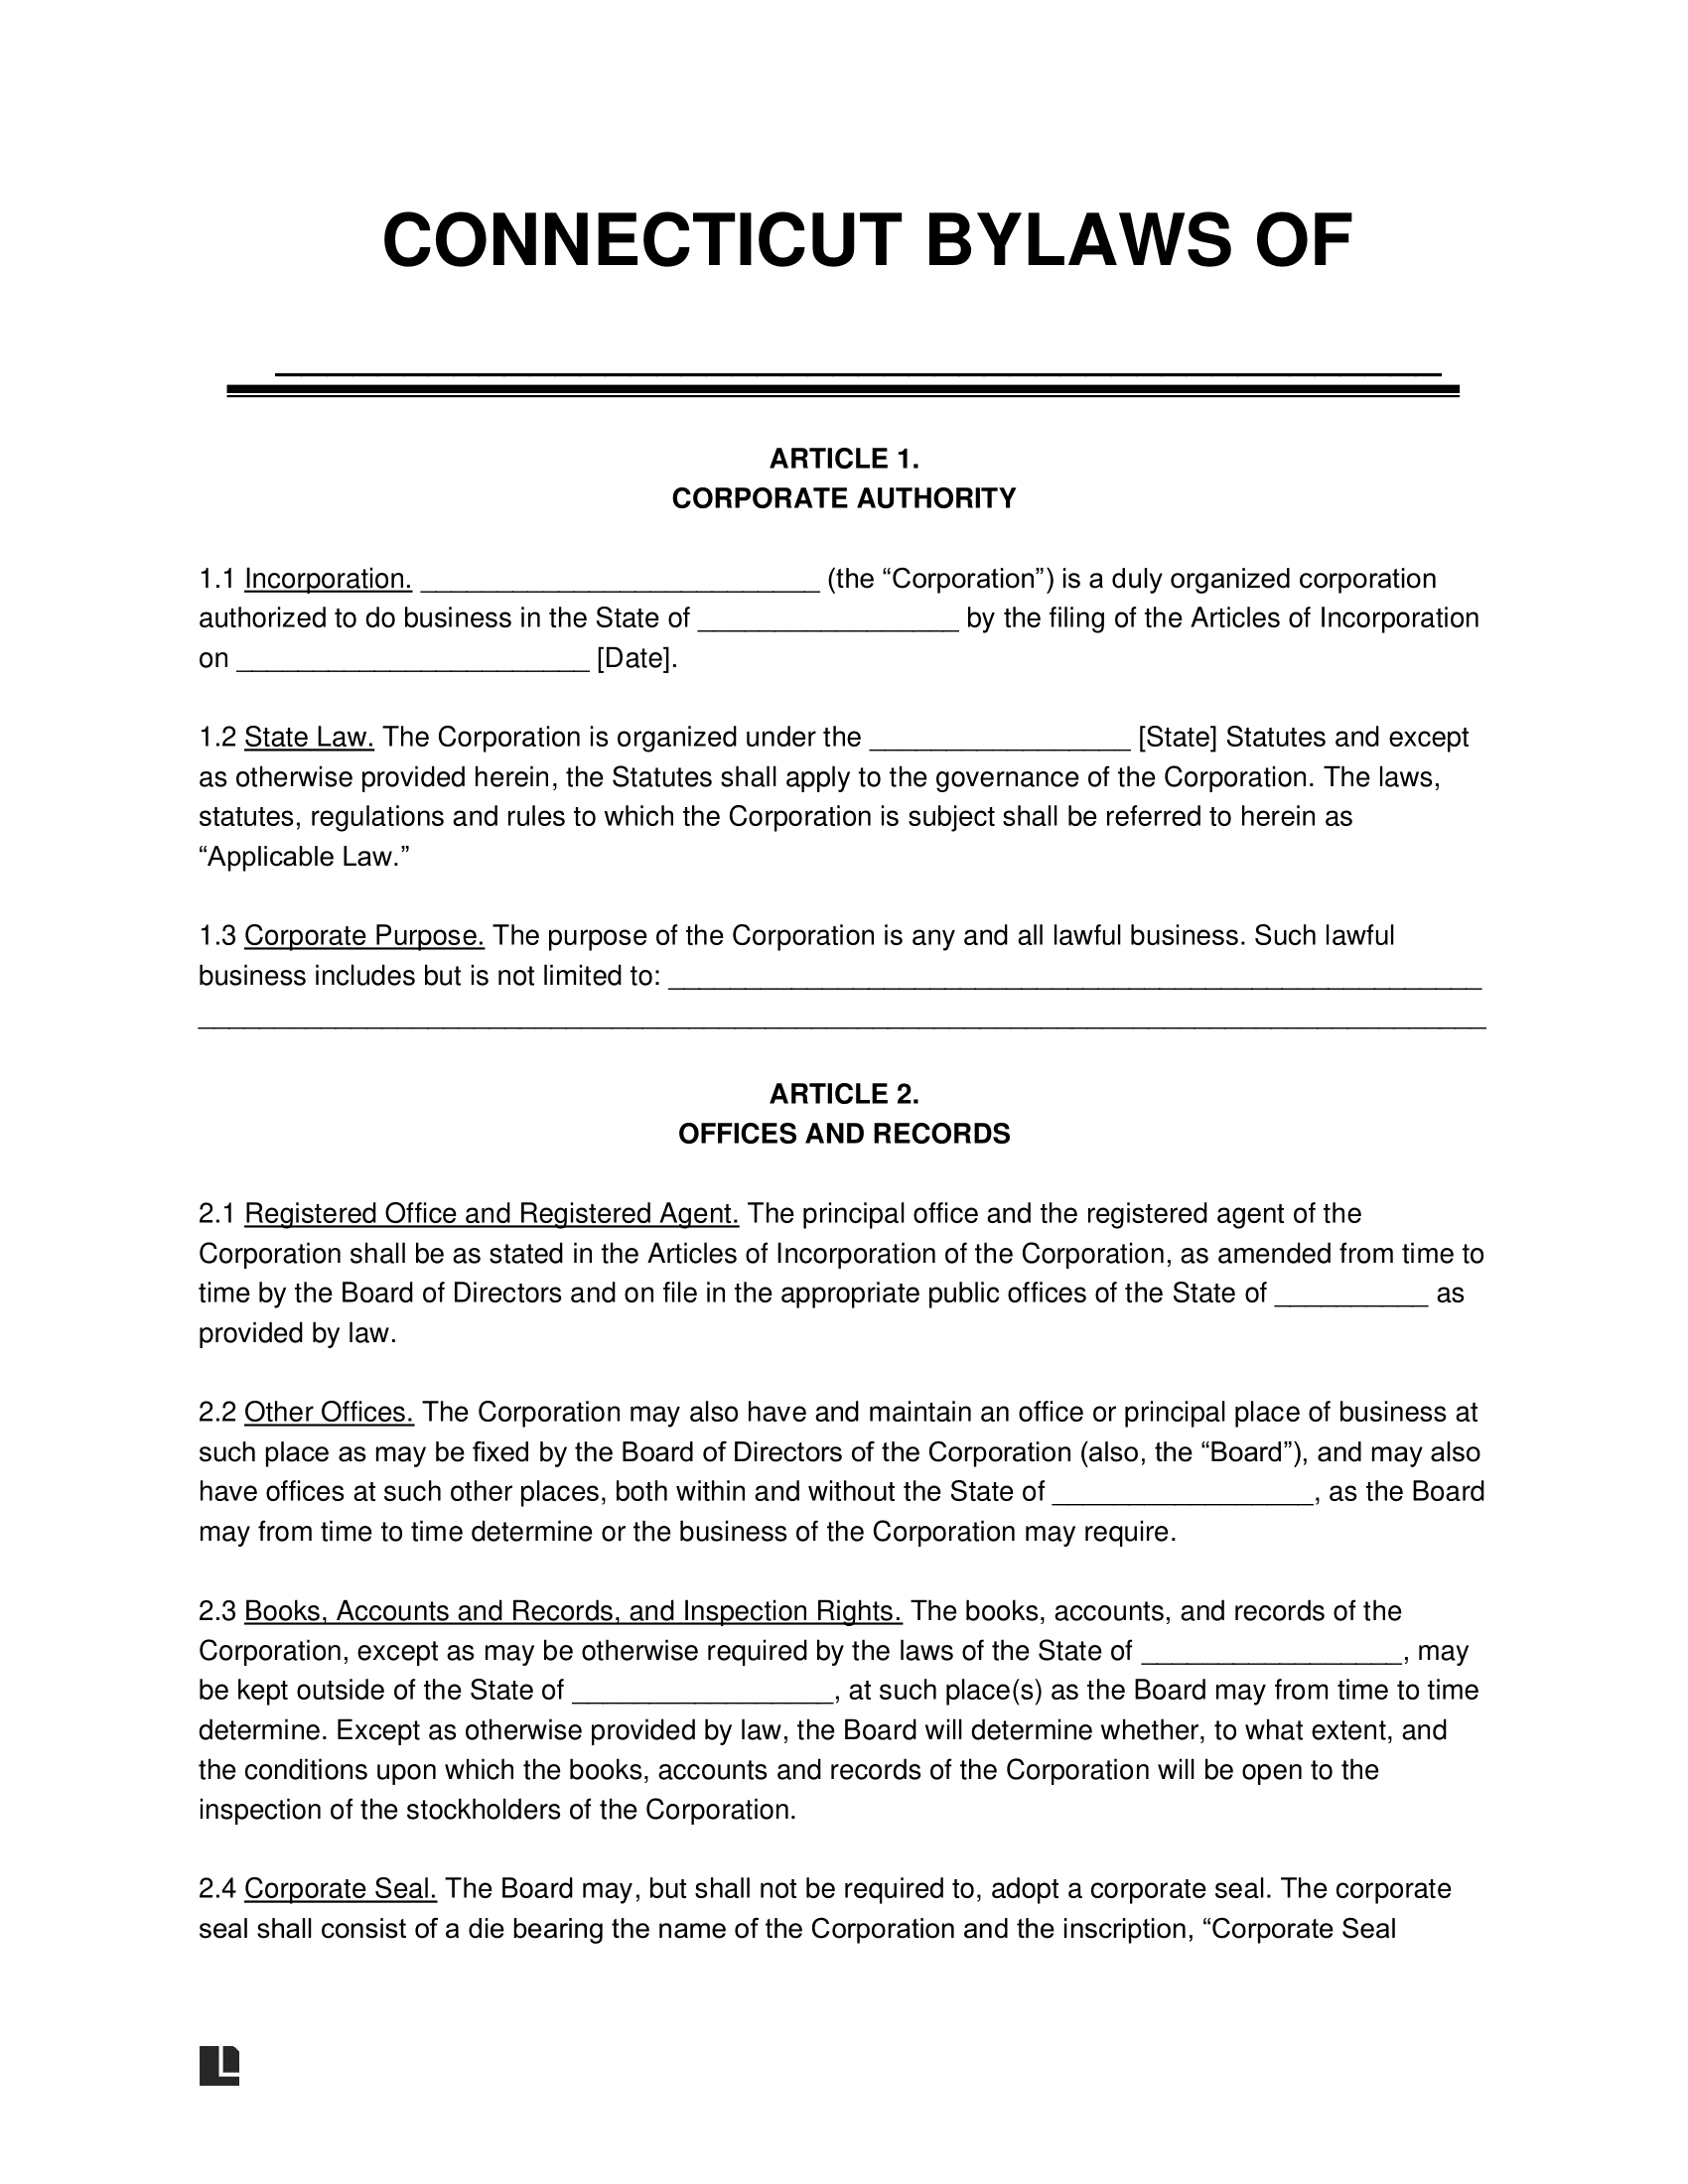 Connecticut Corporate Bylaws Template